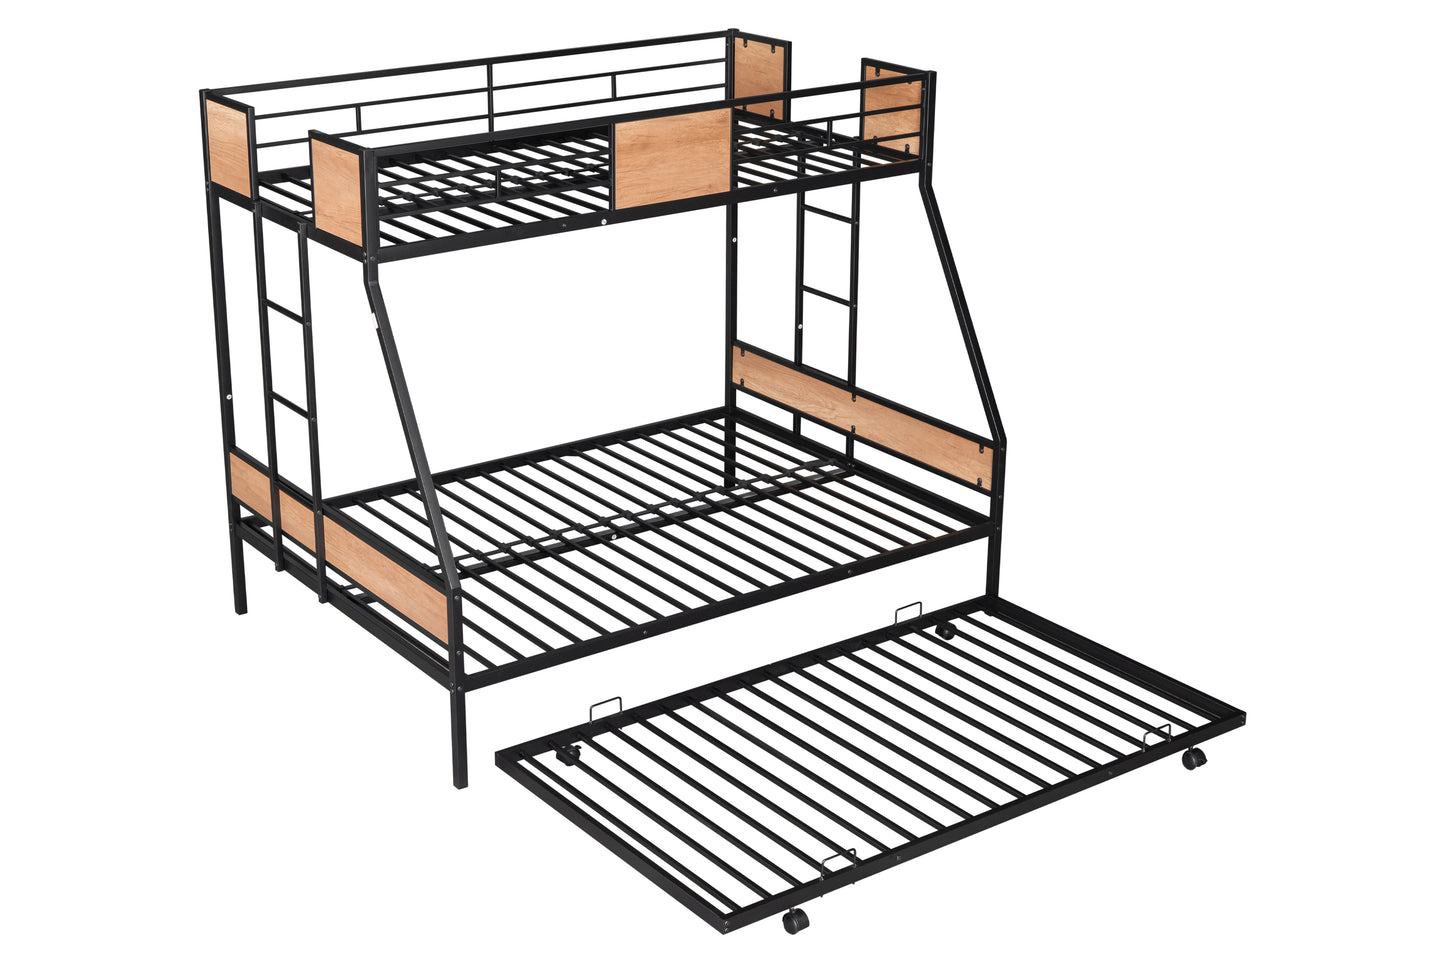 Metal Twin over Full Bunk Bed with Trundle/ Heavy-duty Sturdy Metal/ Noise Reduced/ Safety Guardrail/ Wooden Decoration/ Convenient Trundle / Bunk Bed for Three/ CPC Certified/ No Box Spring Needed